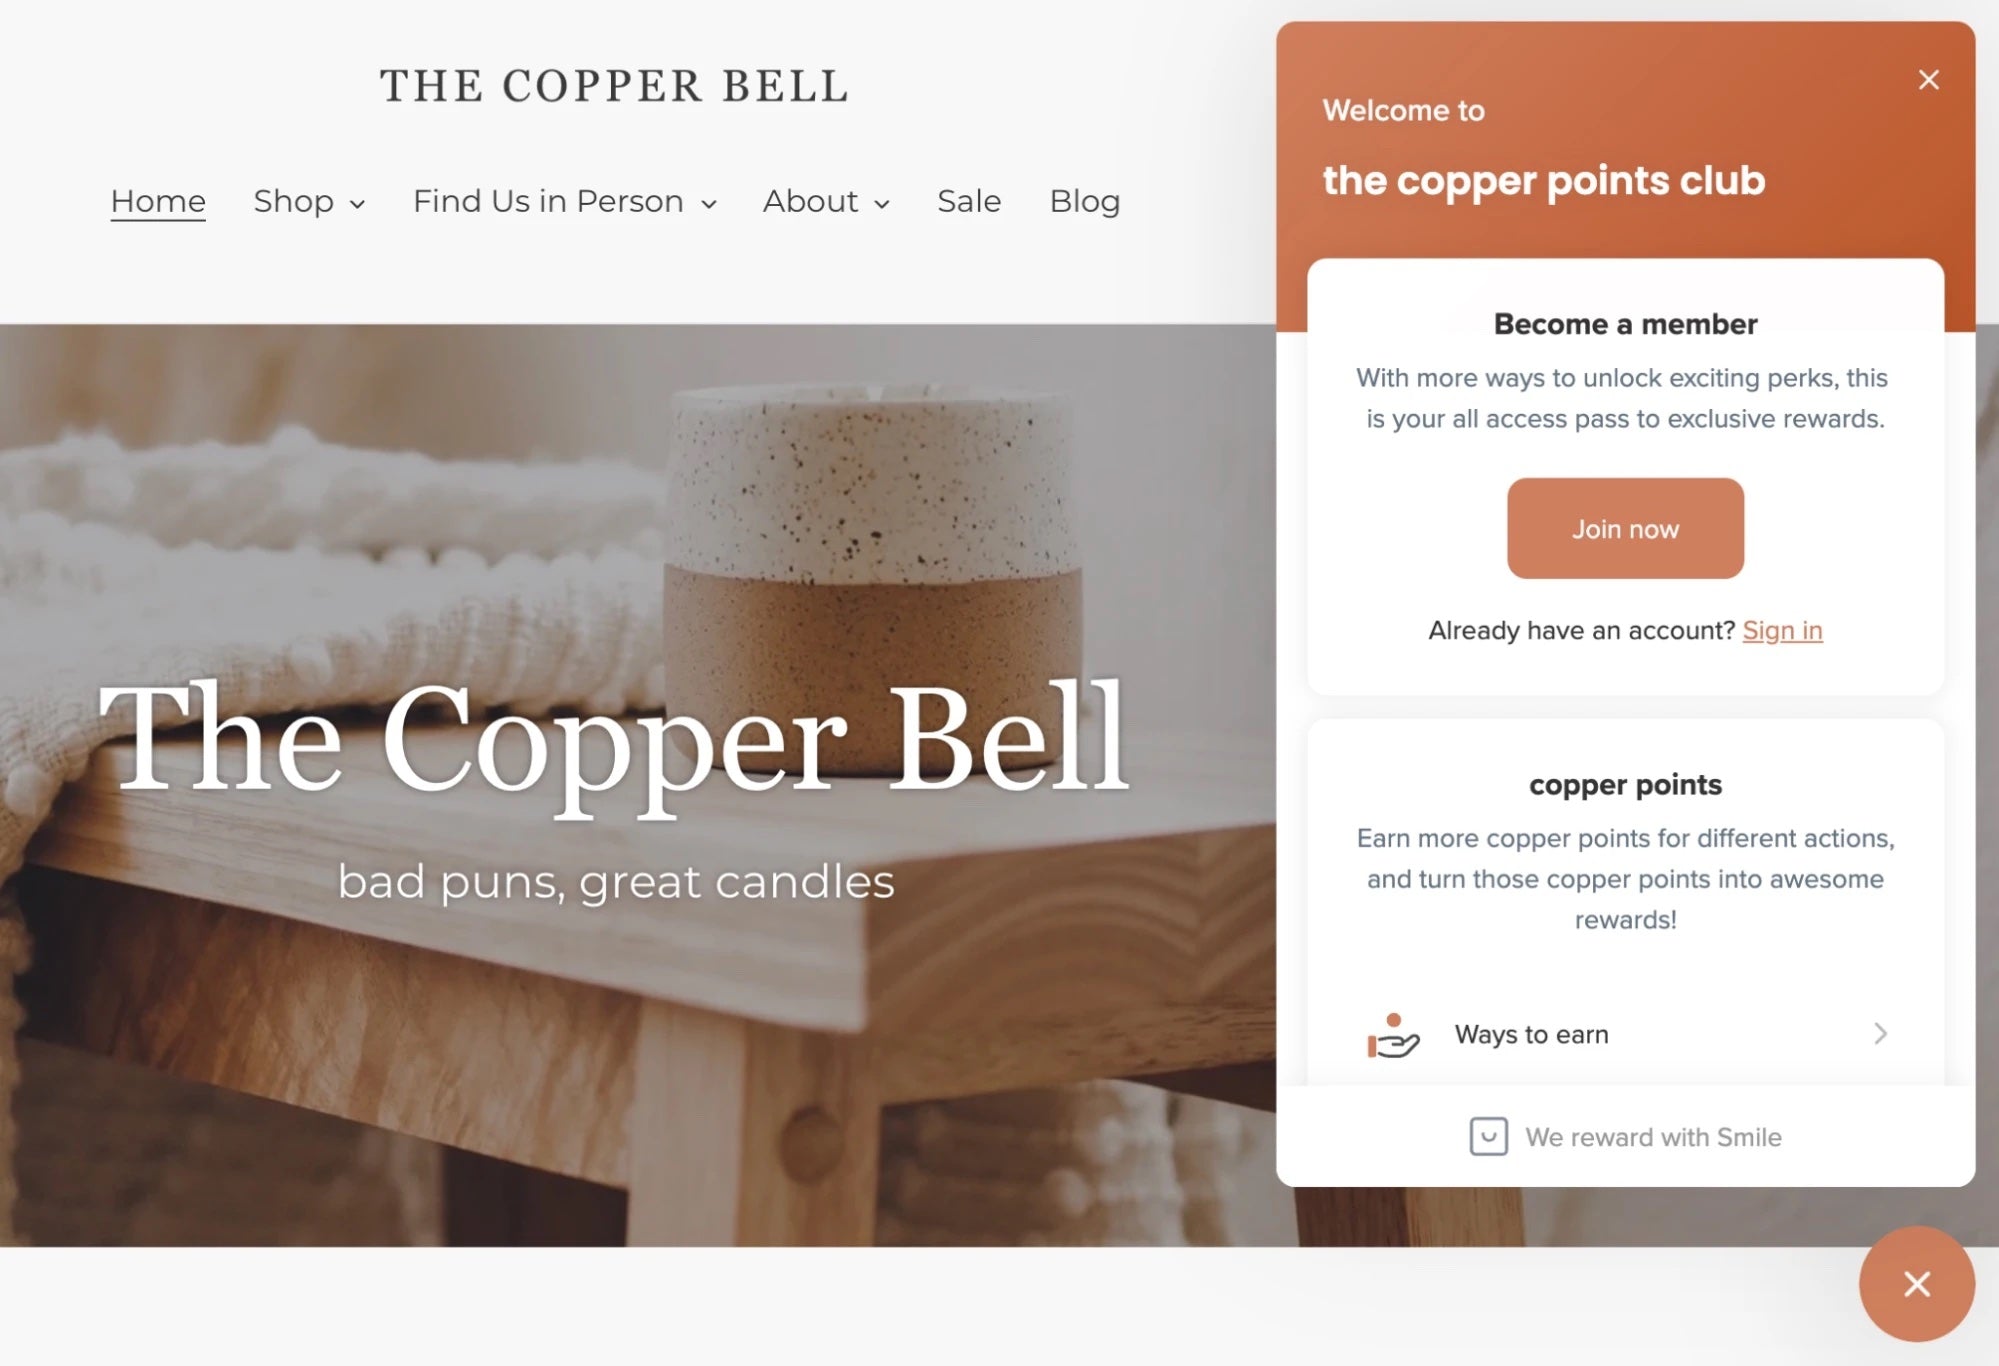 The Copper Bell website